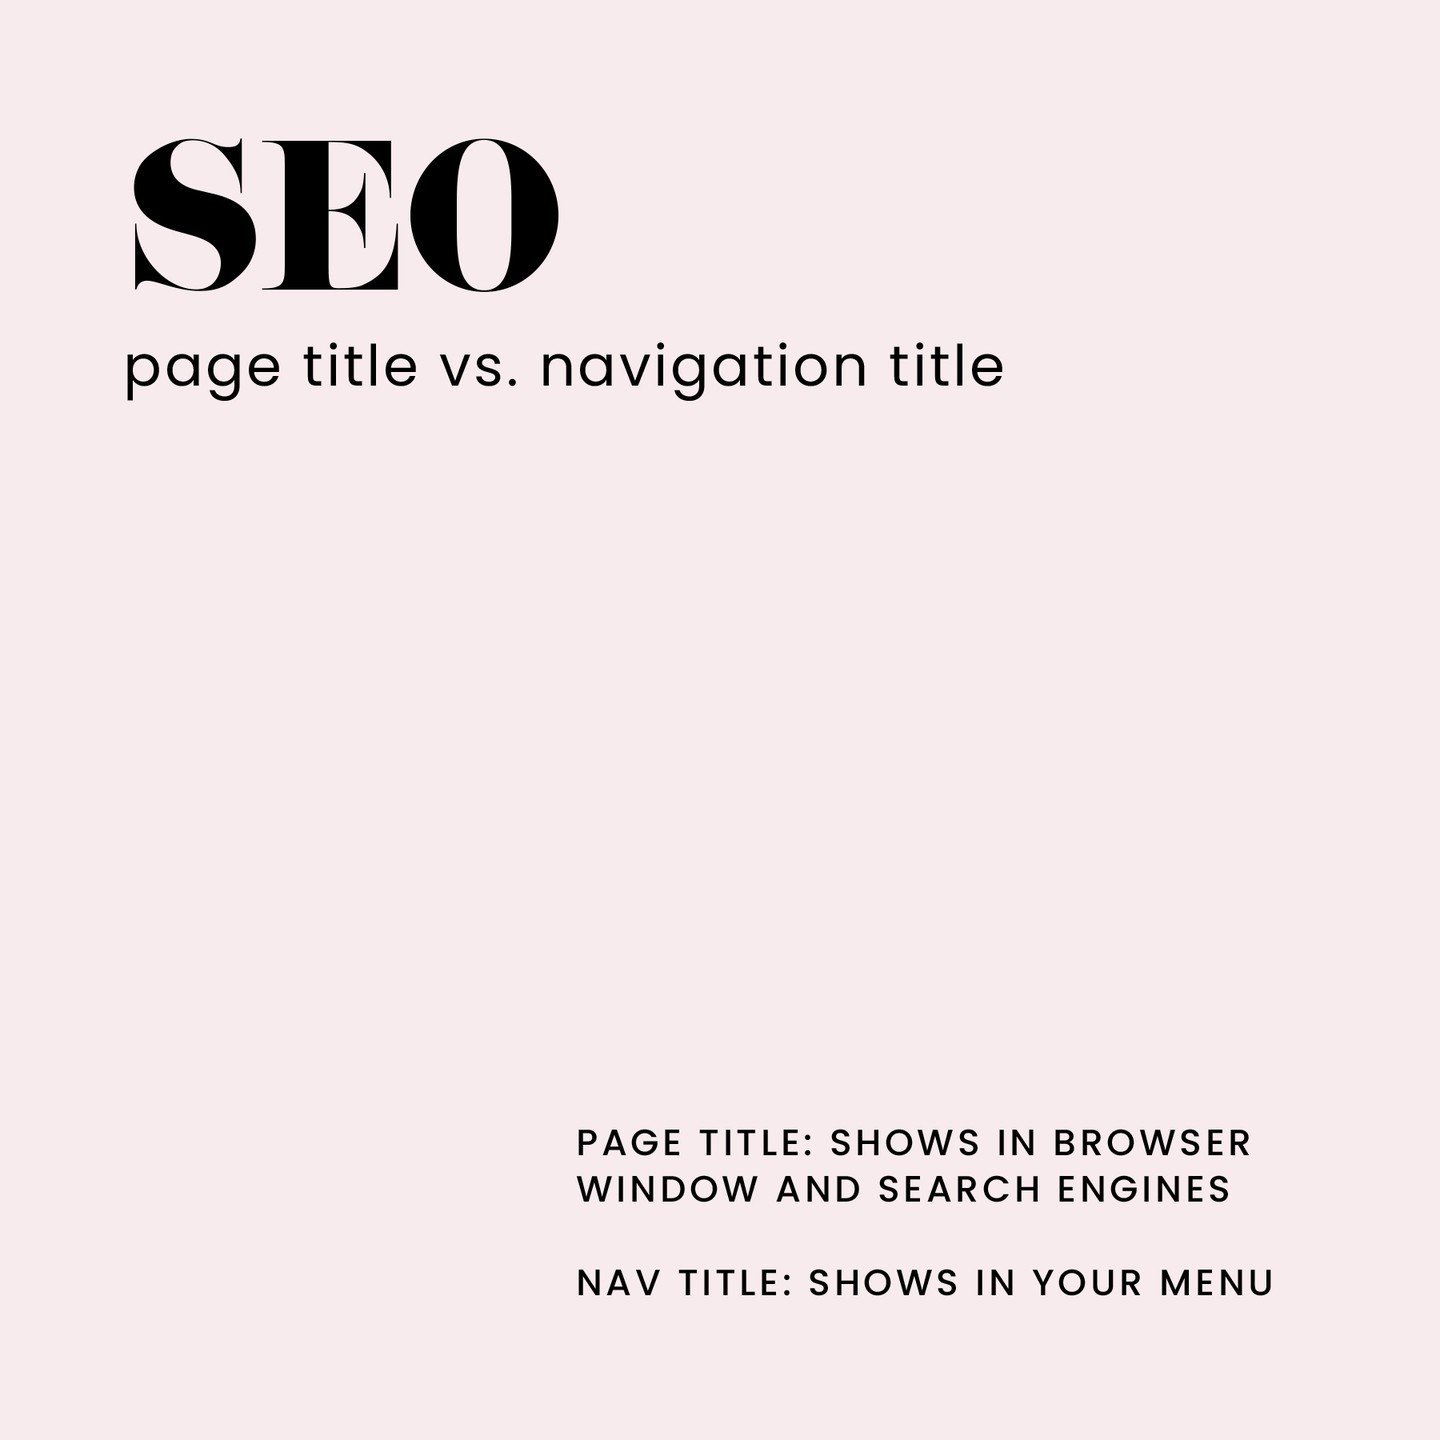 Quick SEO Tip worth saving:

Did you know there are two different kinds of titles on your website? These titles take your audience to where they want to go, BUT only if they're clear!

Page Title: Shows in the browser window, on tabs and on search engines, like Google.

Navigation Title: Shows in your Menu or in the main navigation

⭐Best Rule of Thumb:
Navigation Titles are typically one word. Example: Services

Page Titles are more explanatory, with searchable terms and keywords. Example: Wedding Floral Services in Kansas City, Missouri

By listing the location or more in-depth specifics in your page titles, Google will be able to filter and provide a better user-experience!!

🖤Save this later and follow us more for tips like this!

#websitetips #websitetip #seotip #seo #seotips #websitedesigner #websitedesign #websitedesignerkc #kcwebsitedesigner #kansascitycreative #creativeagency #digitalagencykc #websitestrategy #websiteseo #websiteseotips #digitaldesignkc